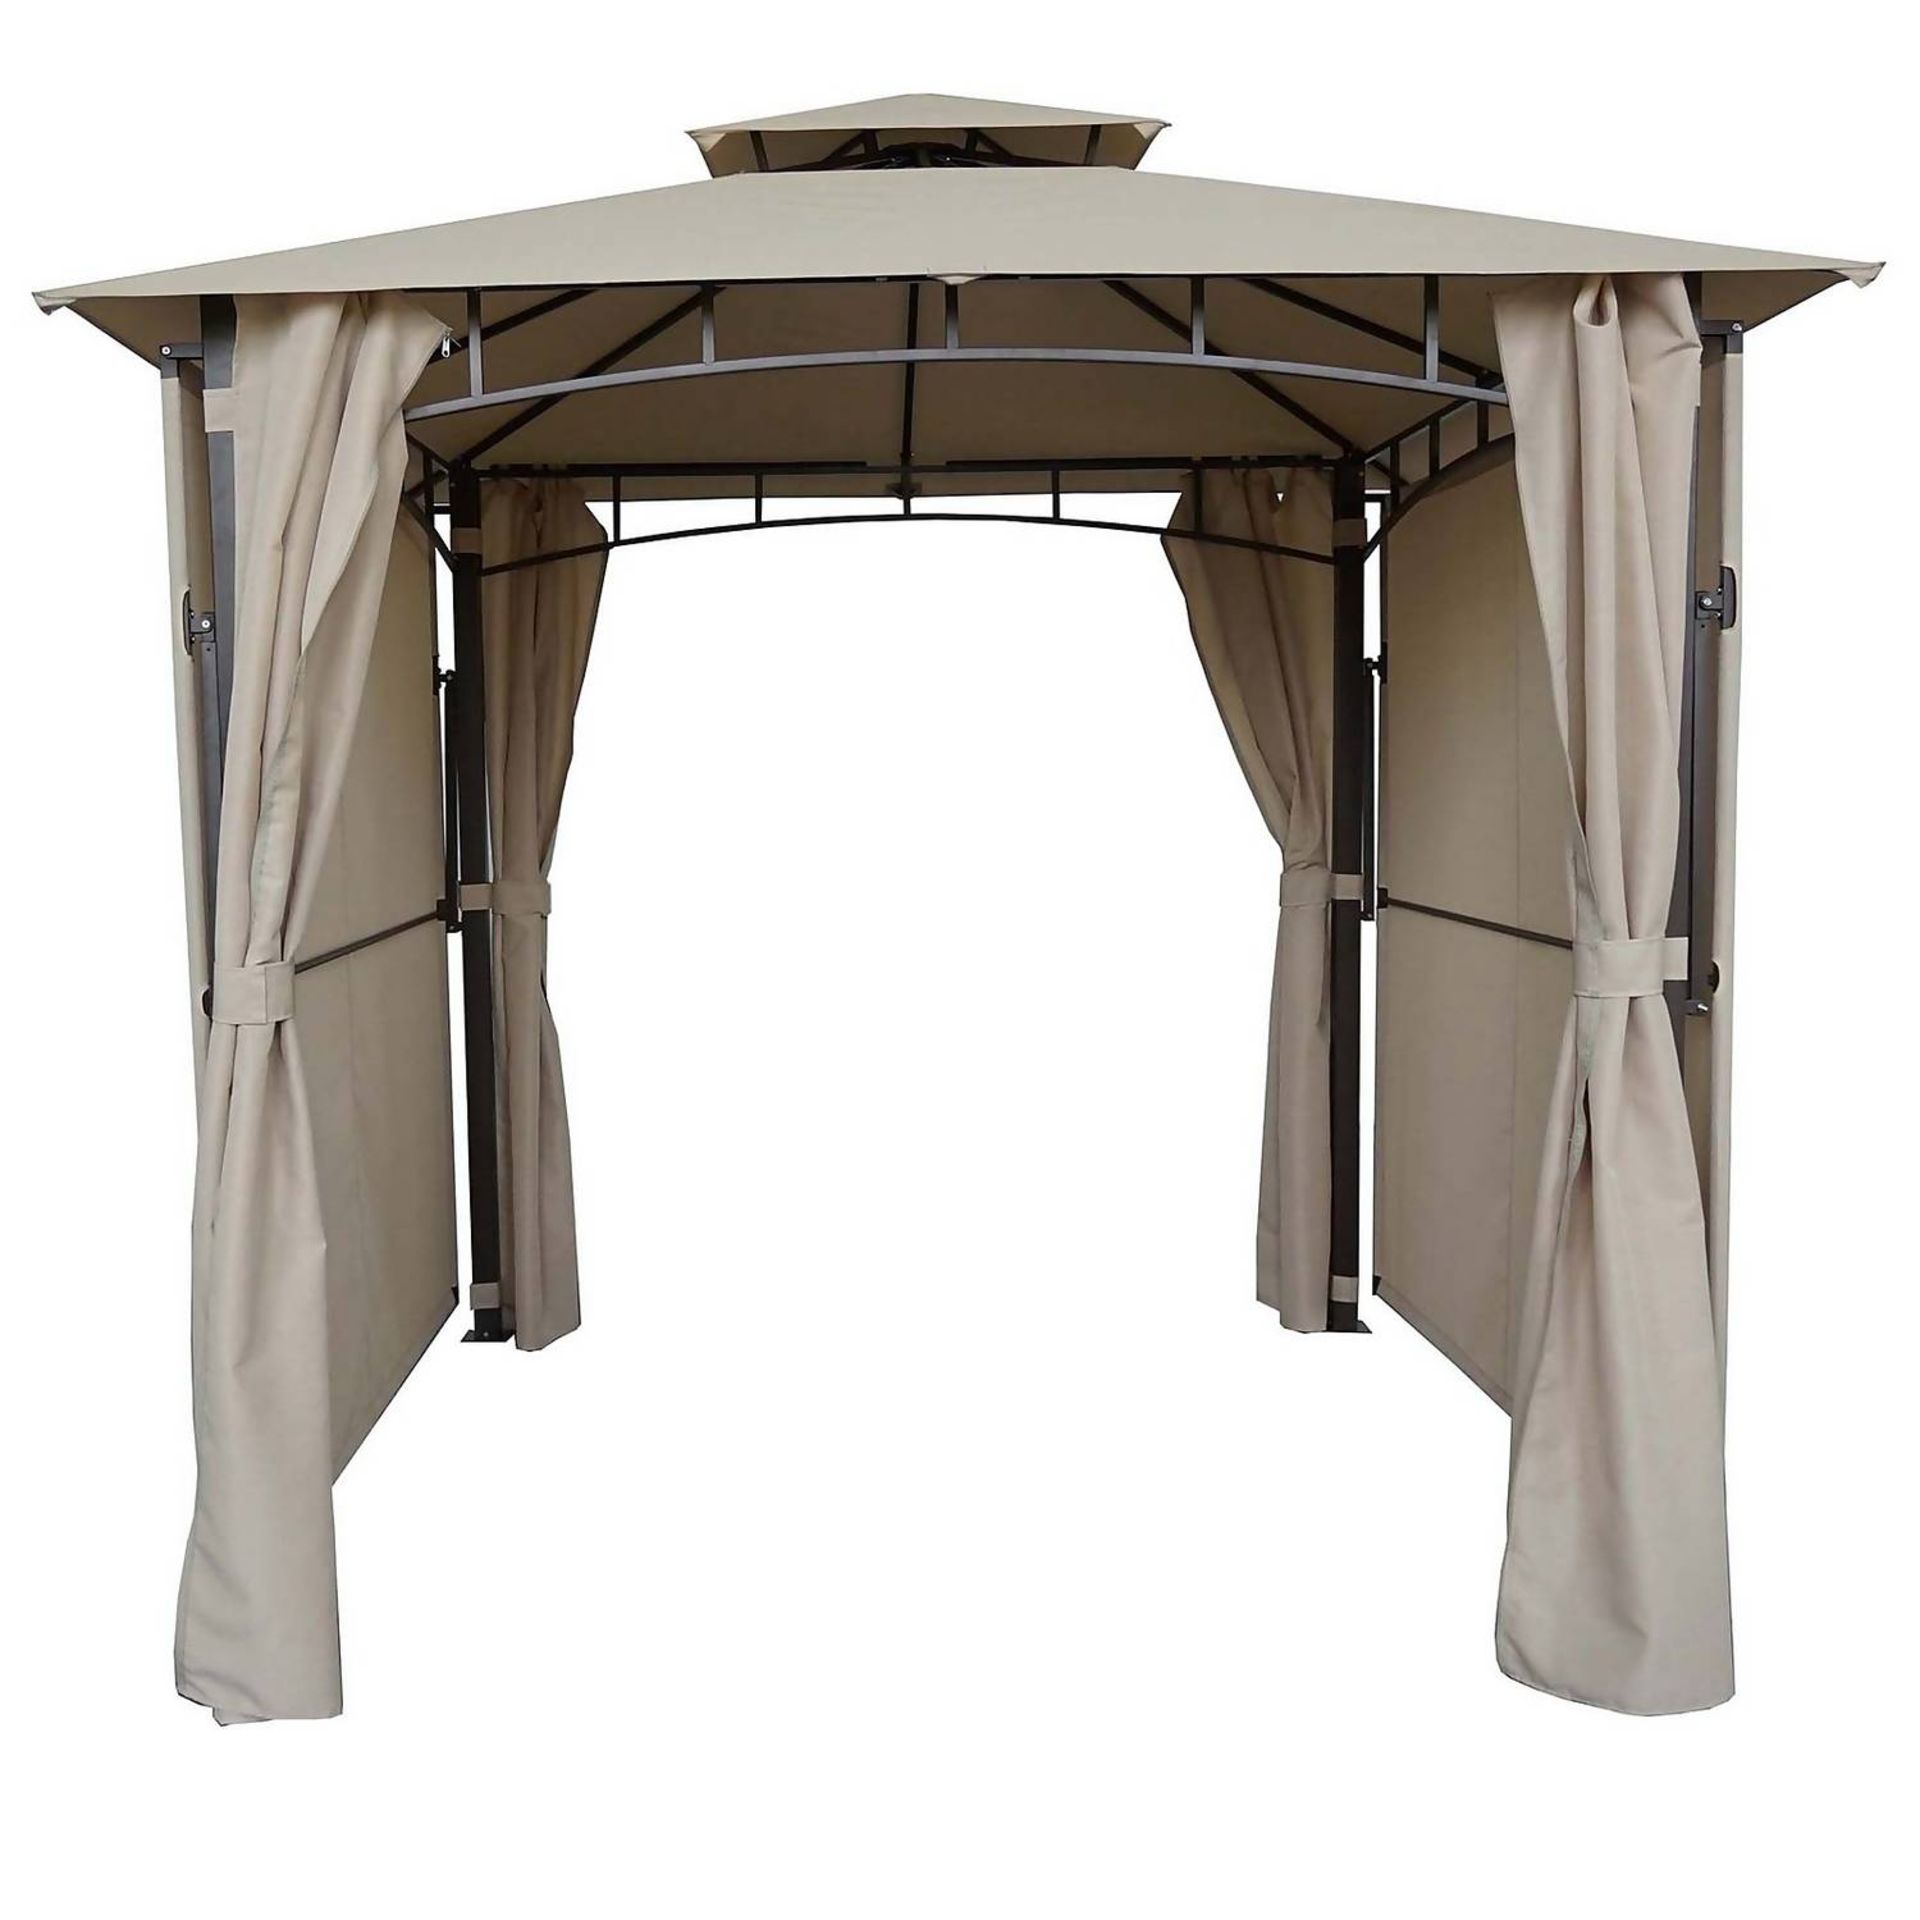 (R8A) 1x Gazebo With Extending Panels RRP £230. Powder Coated Steel Frame. (H265x W250x D250cm)